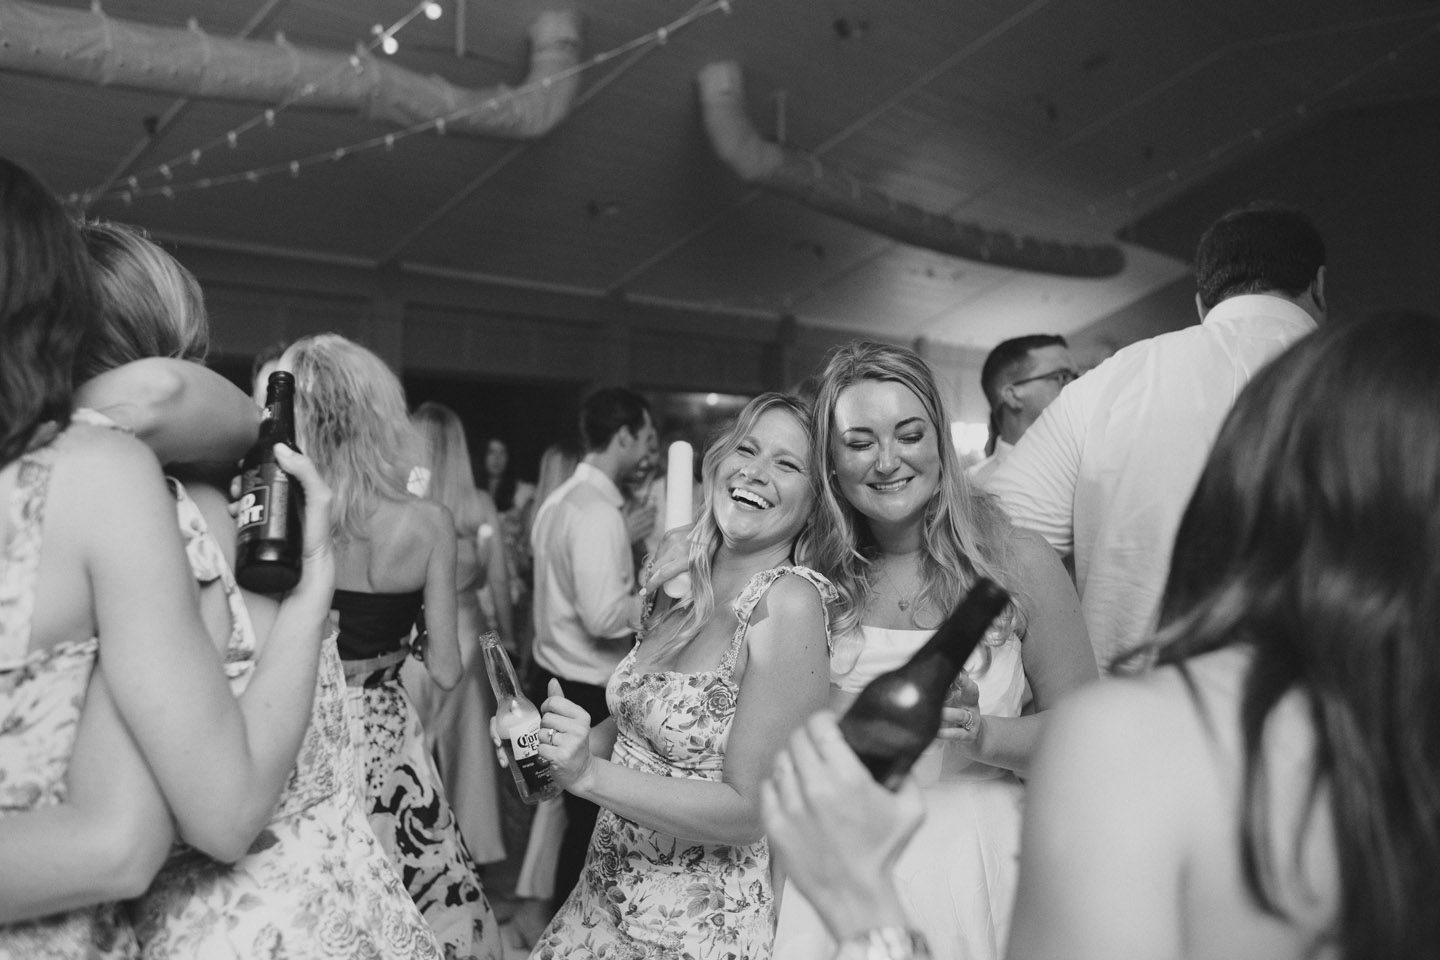 Dancing with friends and enjoying an Outer banks wedding